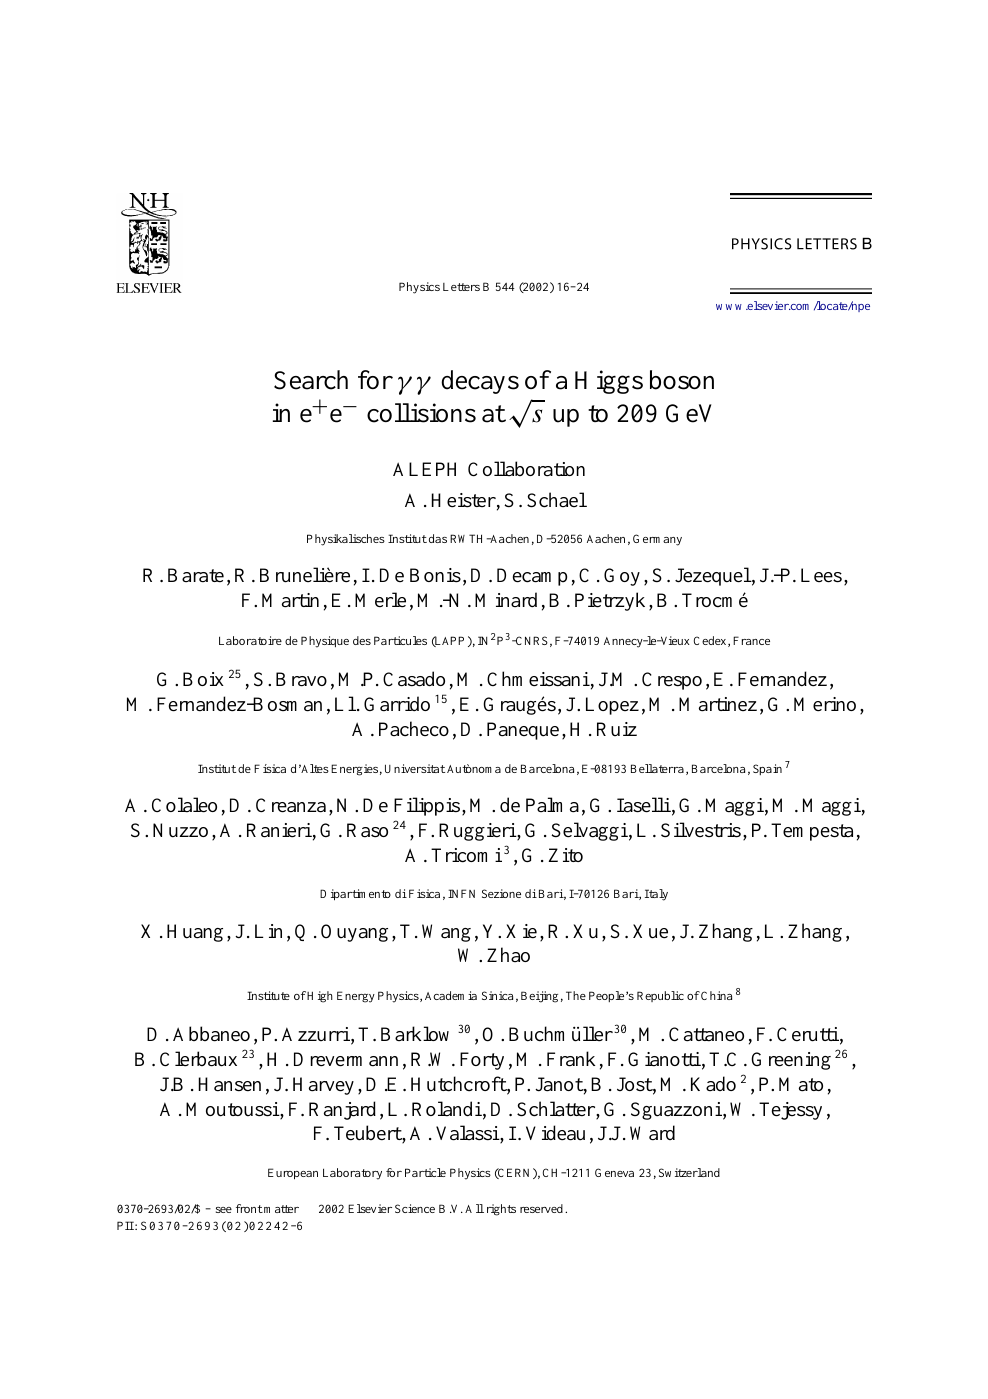 Search For Gg Decays Of A Higgs Boson In E E Collisions At S Up To 9 Gev Topic Of Research Paper In Physical Sciences Download Scholarly Article Pdf And Read For